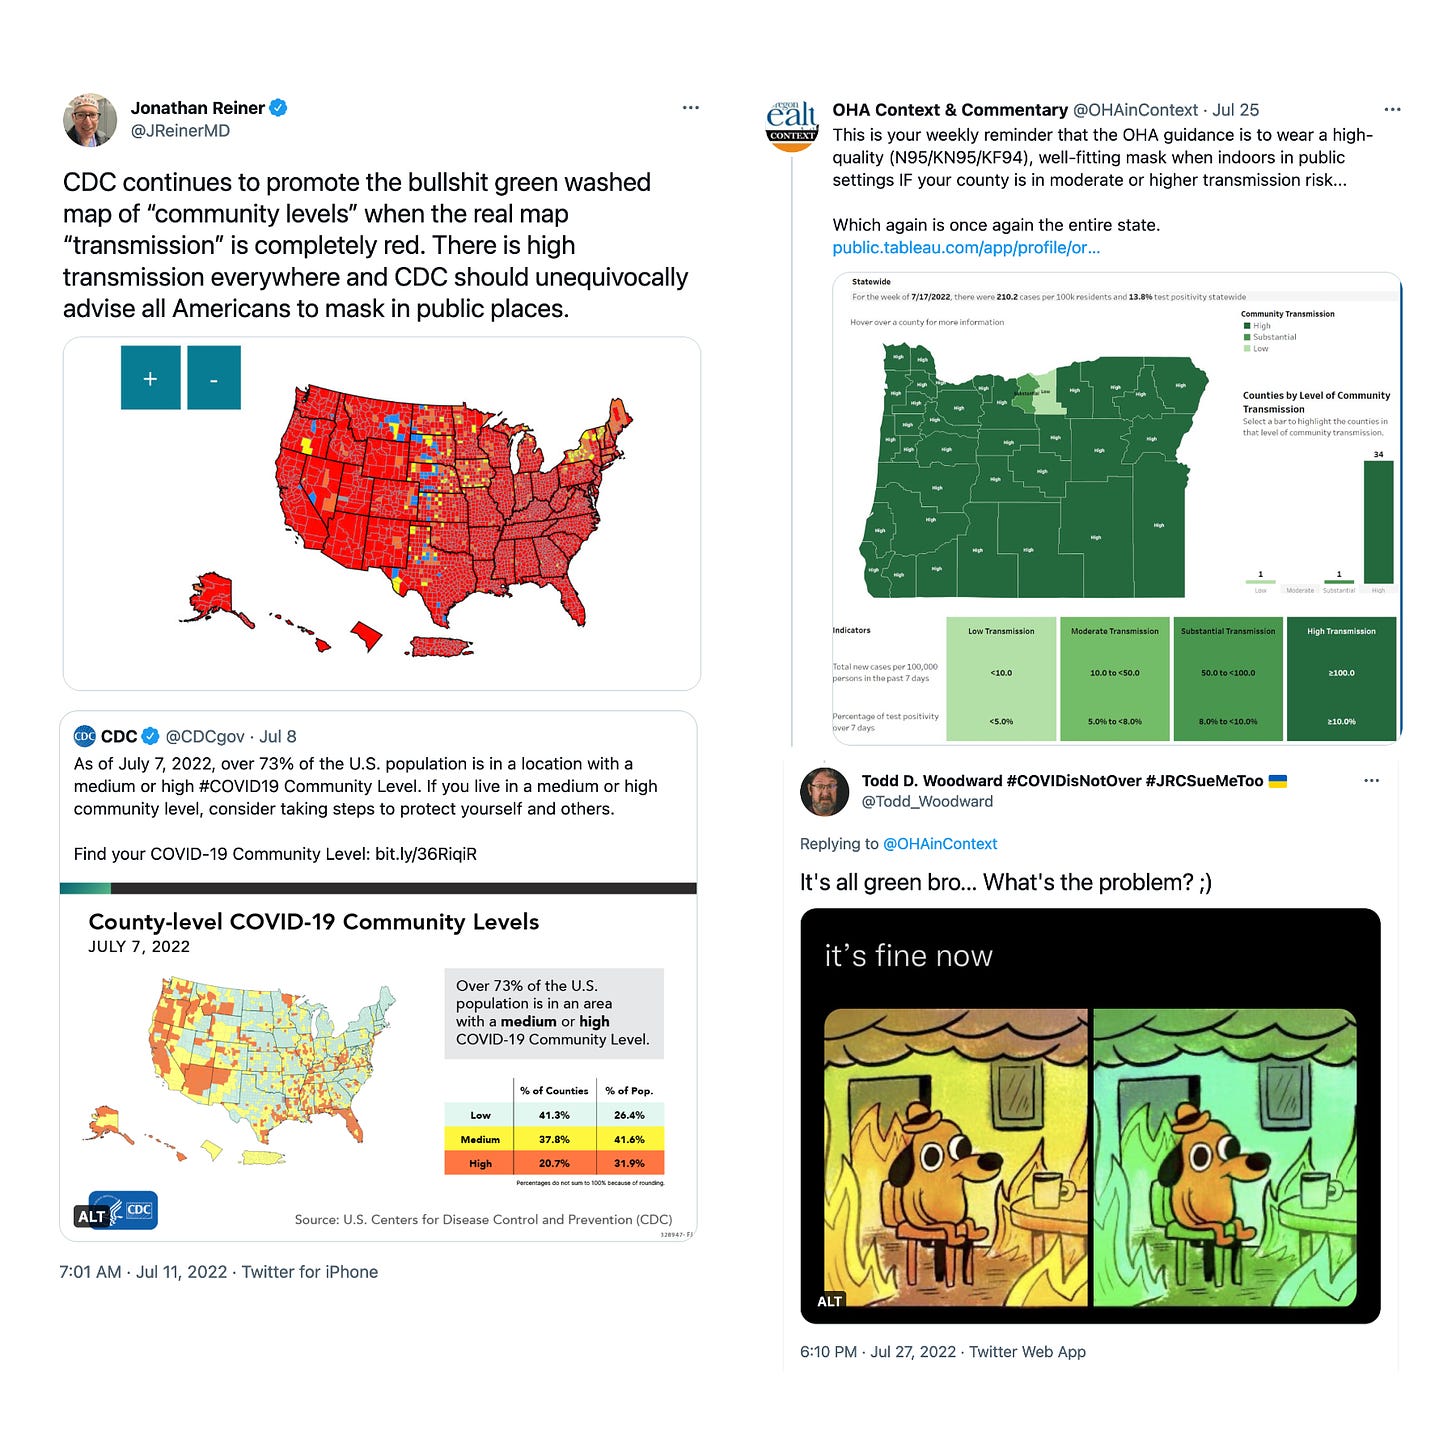 Tweet from Jonathan Reiner @JReinerMD says CDC continues to promote the bullshit green washed map of “community levels” when the real map “transmission” is completely red. There is high transmission everywhere and CDC should unequivocally advise all Americans to mask in public places. The picture shows the transmission map of the CDC with almost all of the U.S. in red. Quote tweet from @CDCgov says As of July 7, 2022, over 73% of the U.S. population is in a location with a medium or high #COVID19 Community Level. If you live in a medium or high community level, consider taking steps to protect yourself and others. A map of the U.S. shows COVID-19 community levels as shades of pastels mostly in green. Another tweet is from OHA Context & Commentary @OHAinContext Jul 25 This is your weekly reminder that the OHA guidance is to wear a high-quality (N95/KN95/KF94), well-fitting mask when indoors in public settings IF your county is in moderate or higher transmission risk... Which again is once again the entire state. And includes a map from Oregon Health Authority and their map visual aid that is a map of Oregon counties and almost completely dark green, all colors on this map are shades of green always, no other colors.And the next tweet is a reply from @Todd_Woodward Saying It's all green bro... What's the problem? Text smiley and posted with the image The this is fine dog meme in 2 panels the first regular, the second completely tinted in green except for the dog. The caption reads It's fine now.